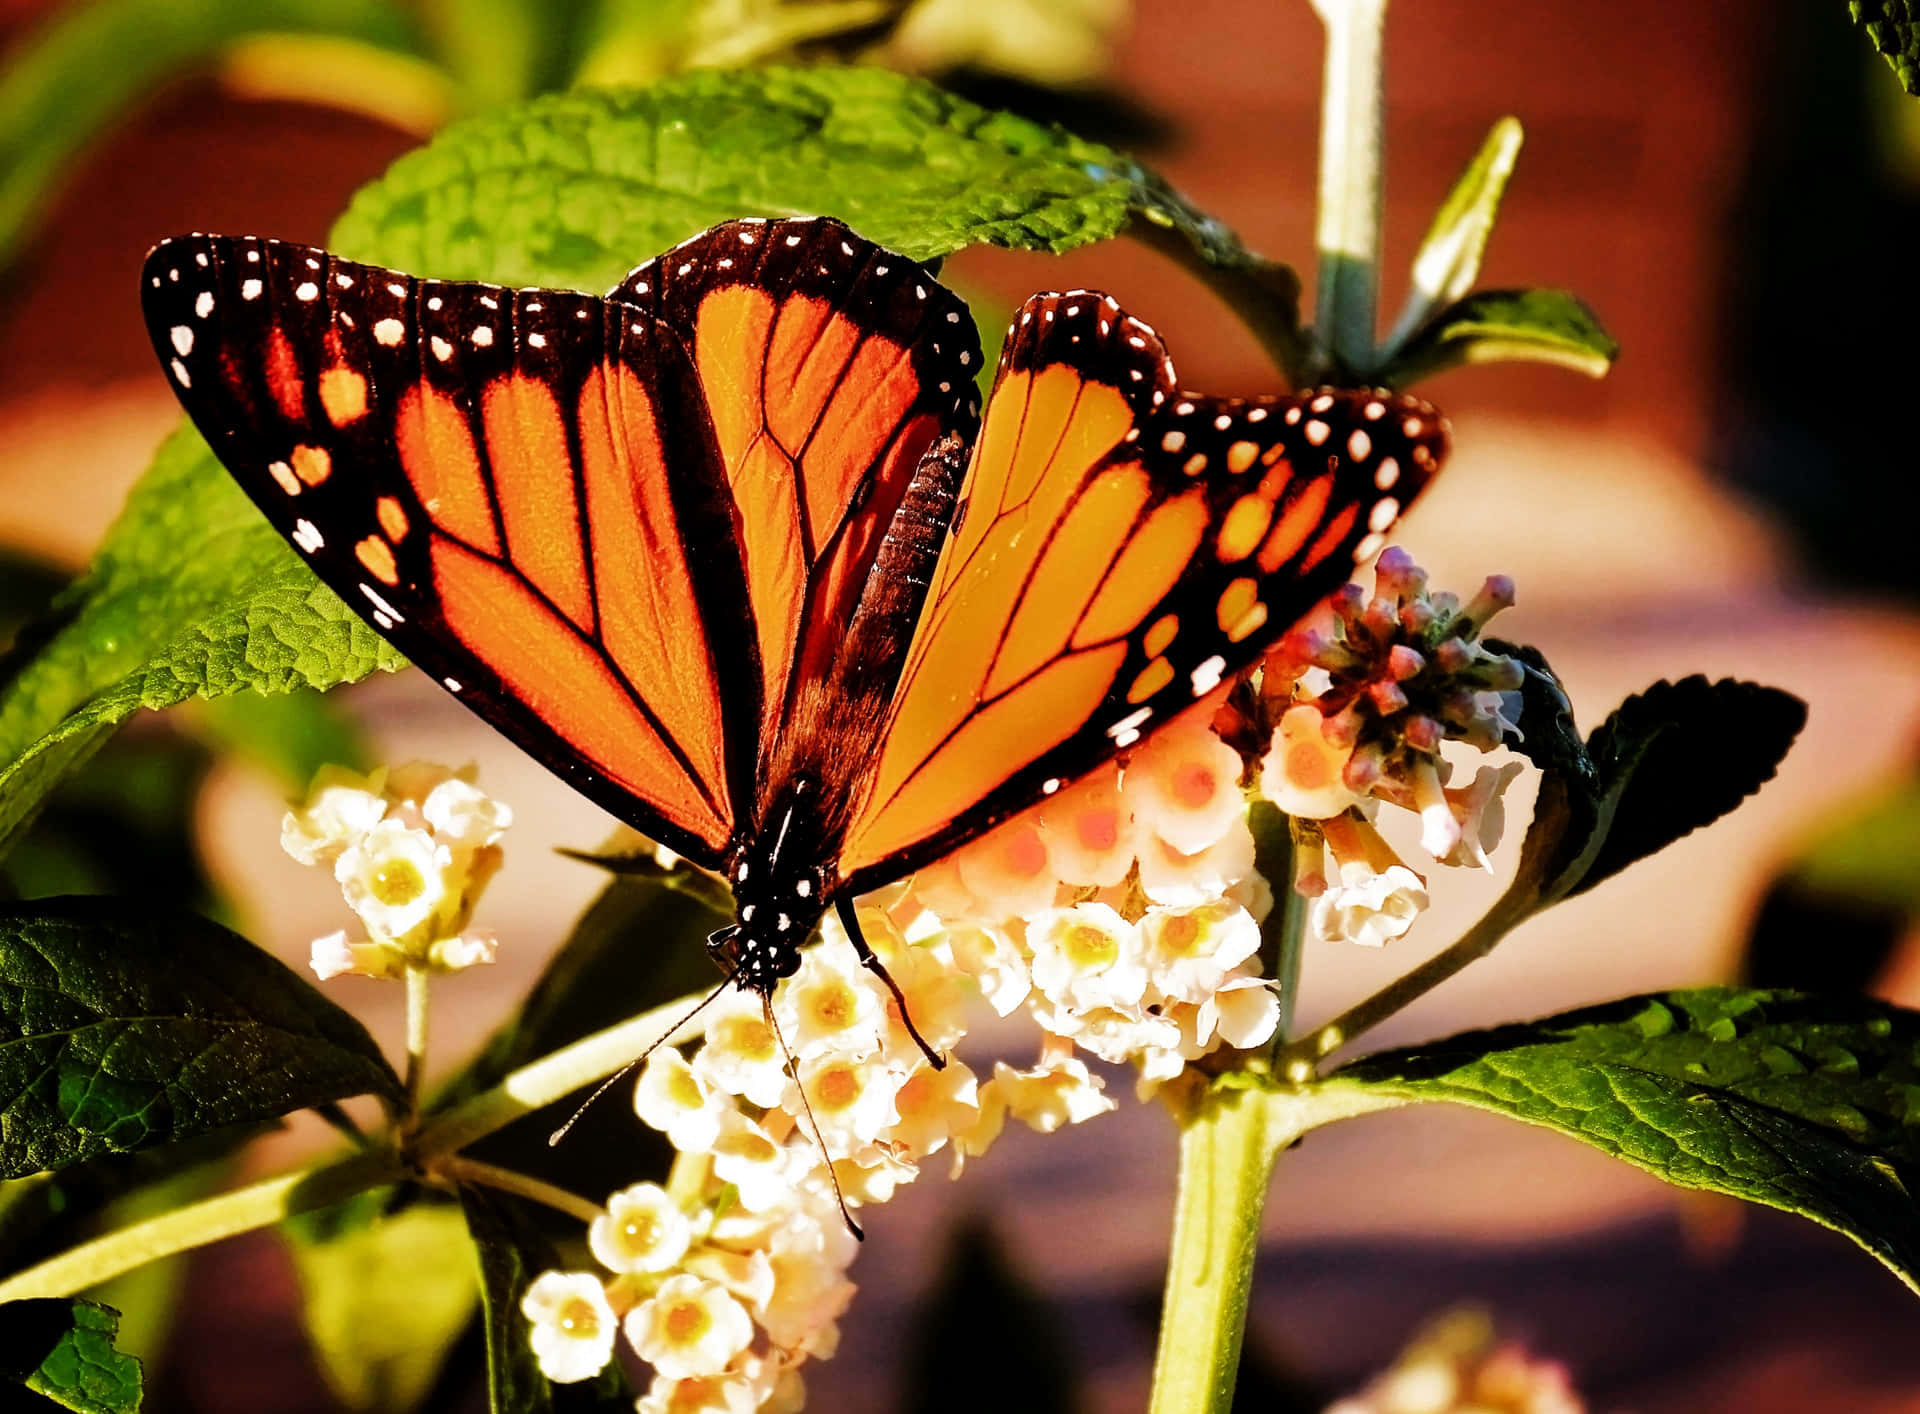 A Monarch Butterfly Landed on a Flower